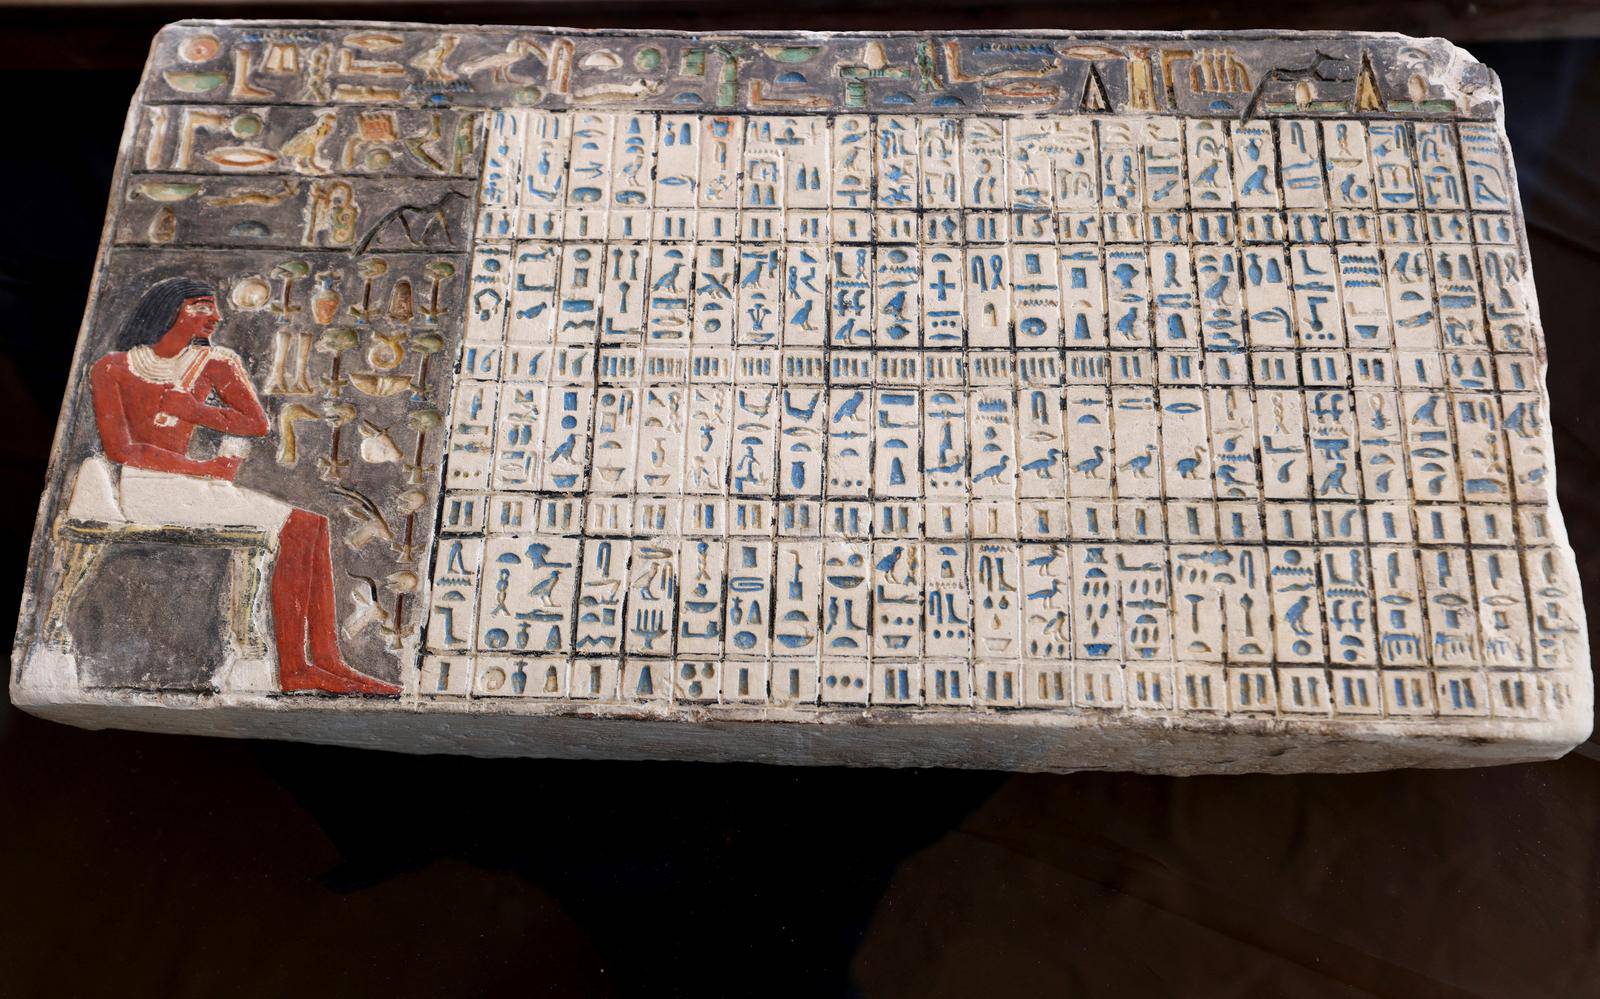 An artifact is displayed after the announcement of 4,300-year-old sealed tombs discovered in Egypt's Saqqara necropolis, in Giza